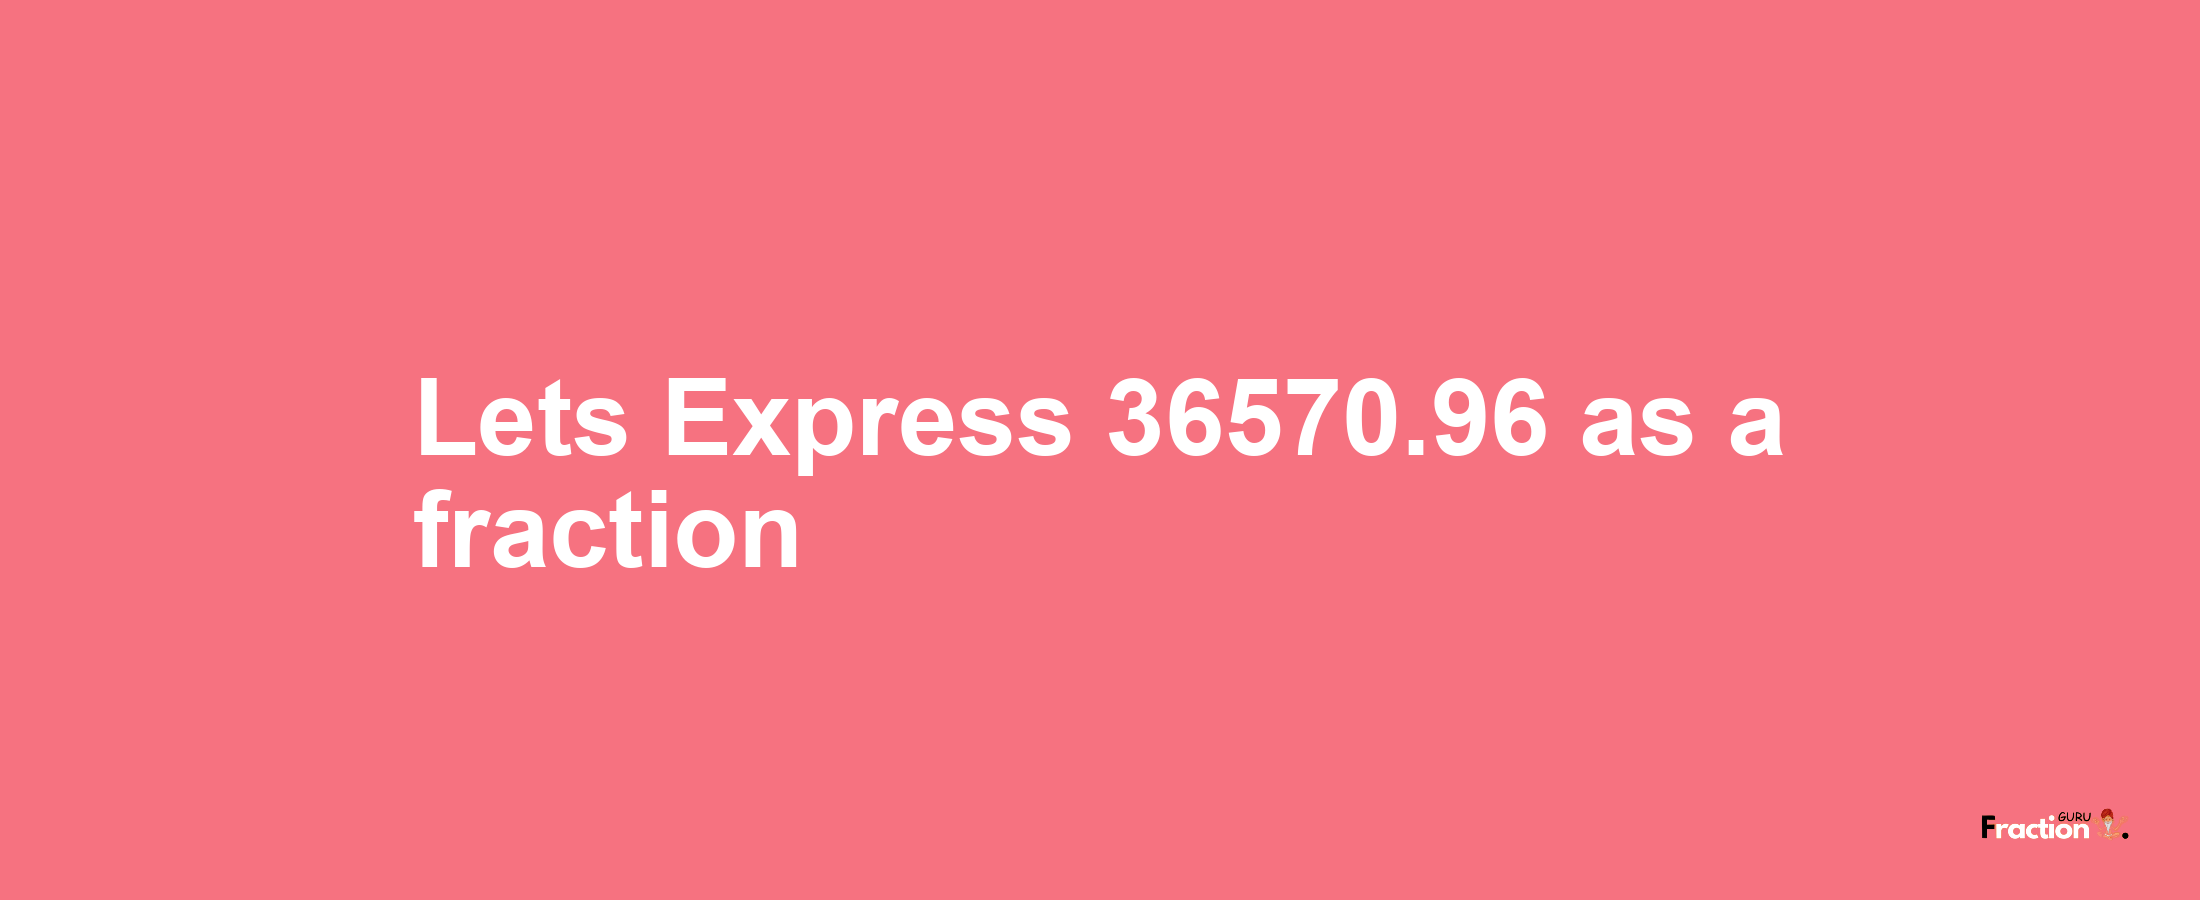 Lets Express 36570.96 as afraction